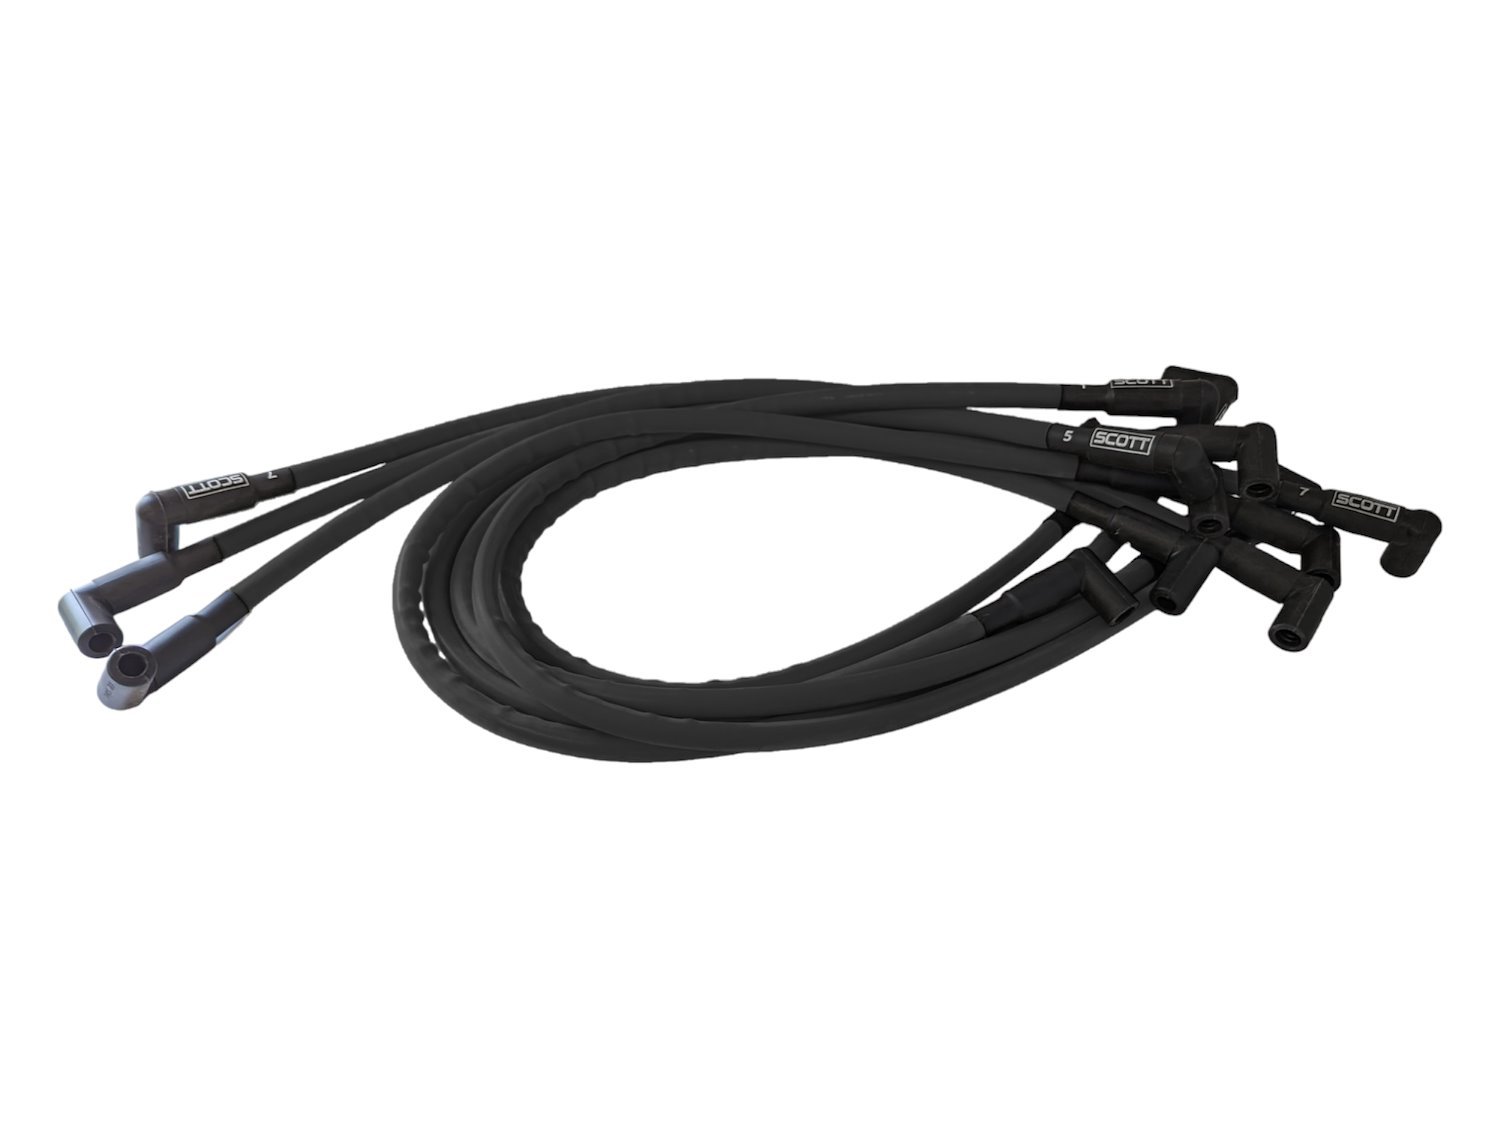 SPW300-CH-437-1 Super Mag Fiberglass-Oversleeved Spark Plug Wire Set for Small Block Chevy, Over & Under [Black]